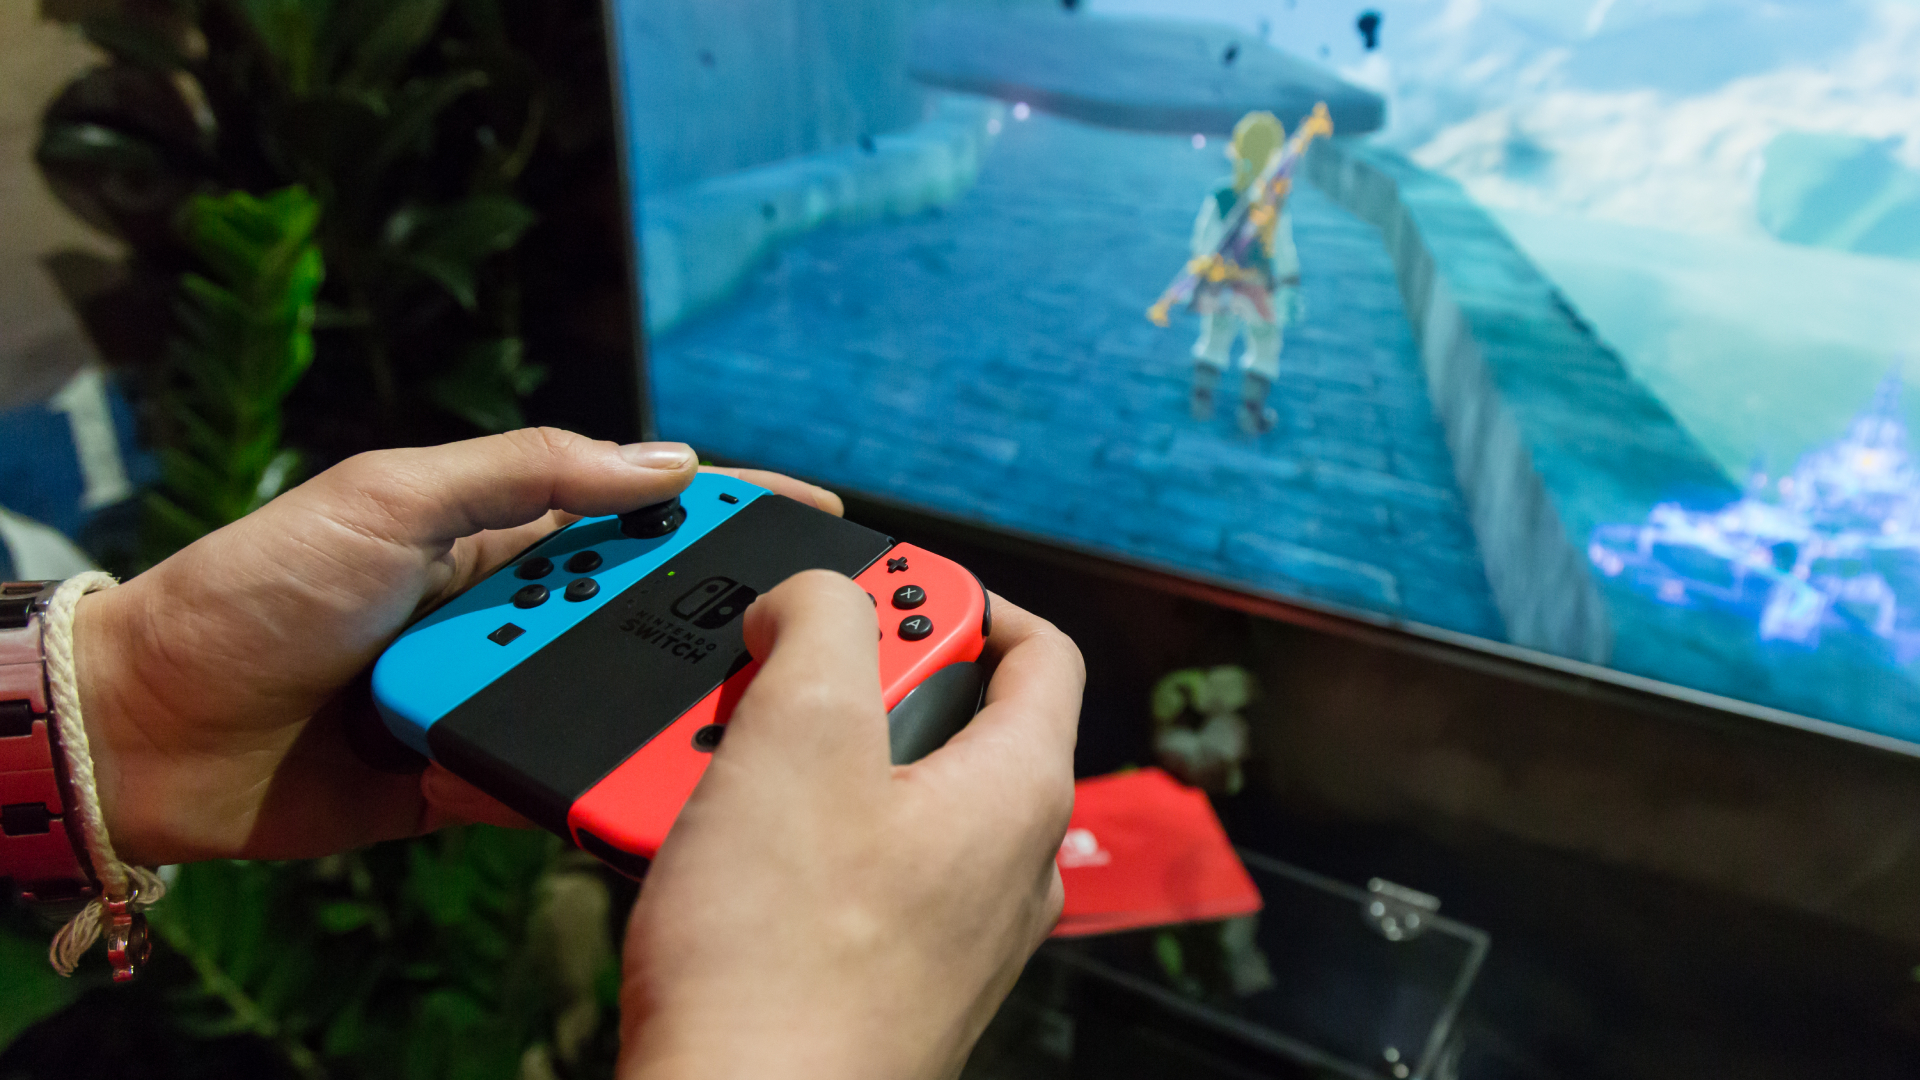 A Nintendo Switch player using the Joy-Con controllers to play Breath of the Wild on a TV